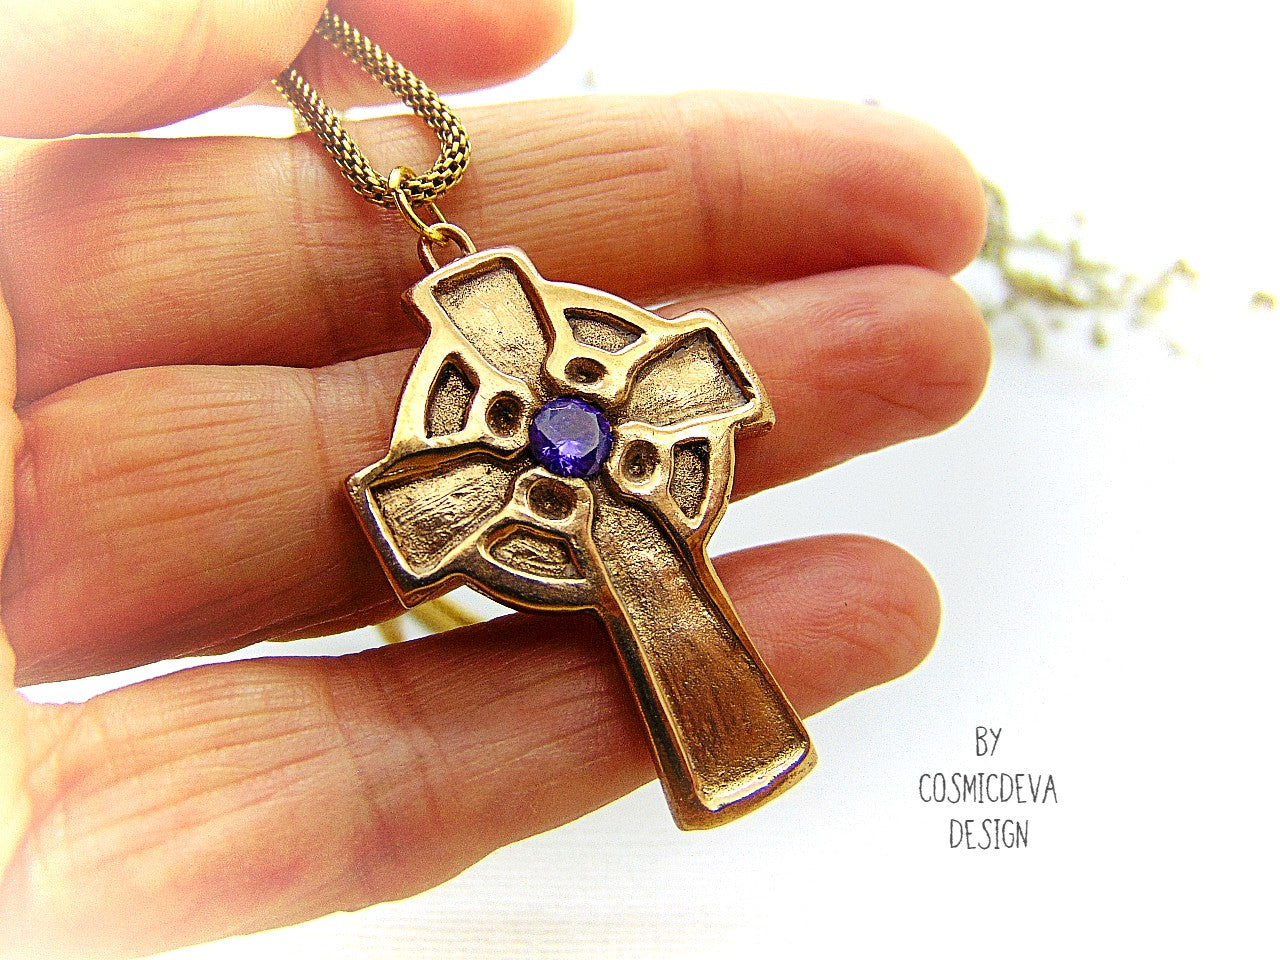 This handmade rustic Celtic Irish Cross pendant is made of solid gold bronze with a purple Amethyst in the center. The circle in the center represents the sun, an important item of worship in druid religion.